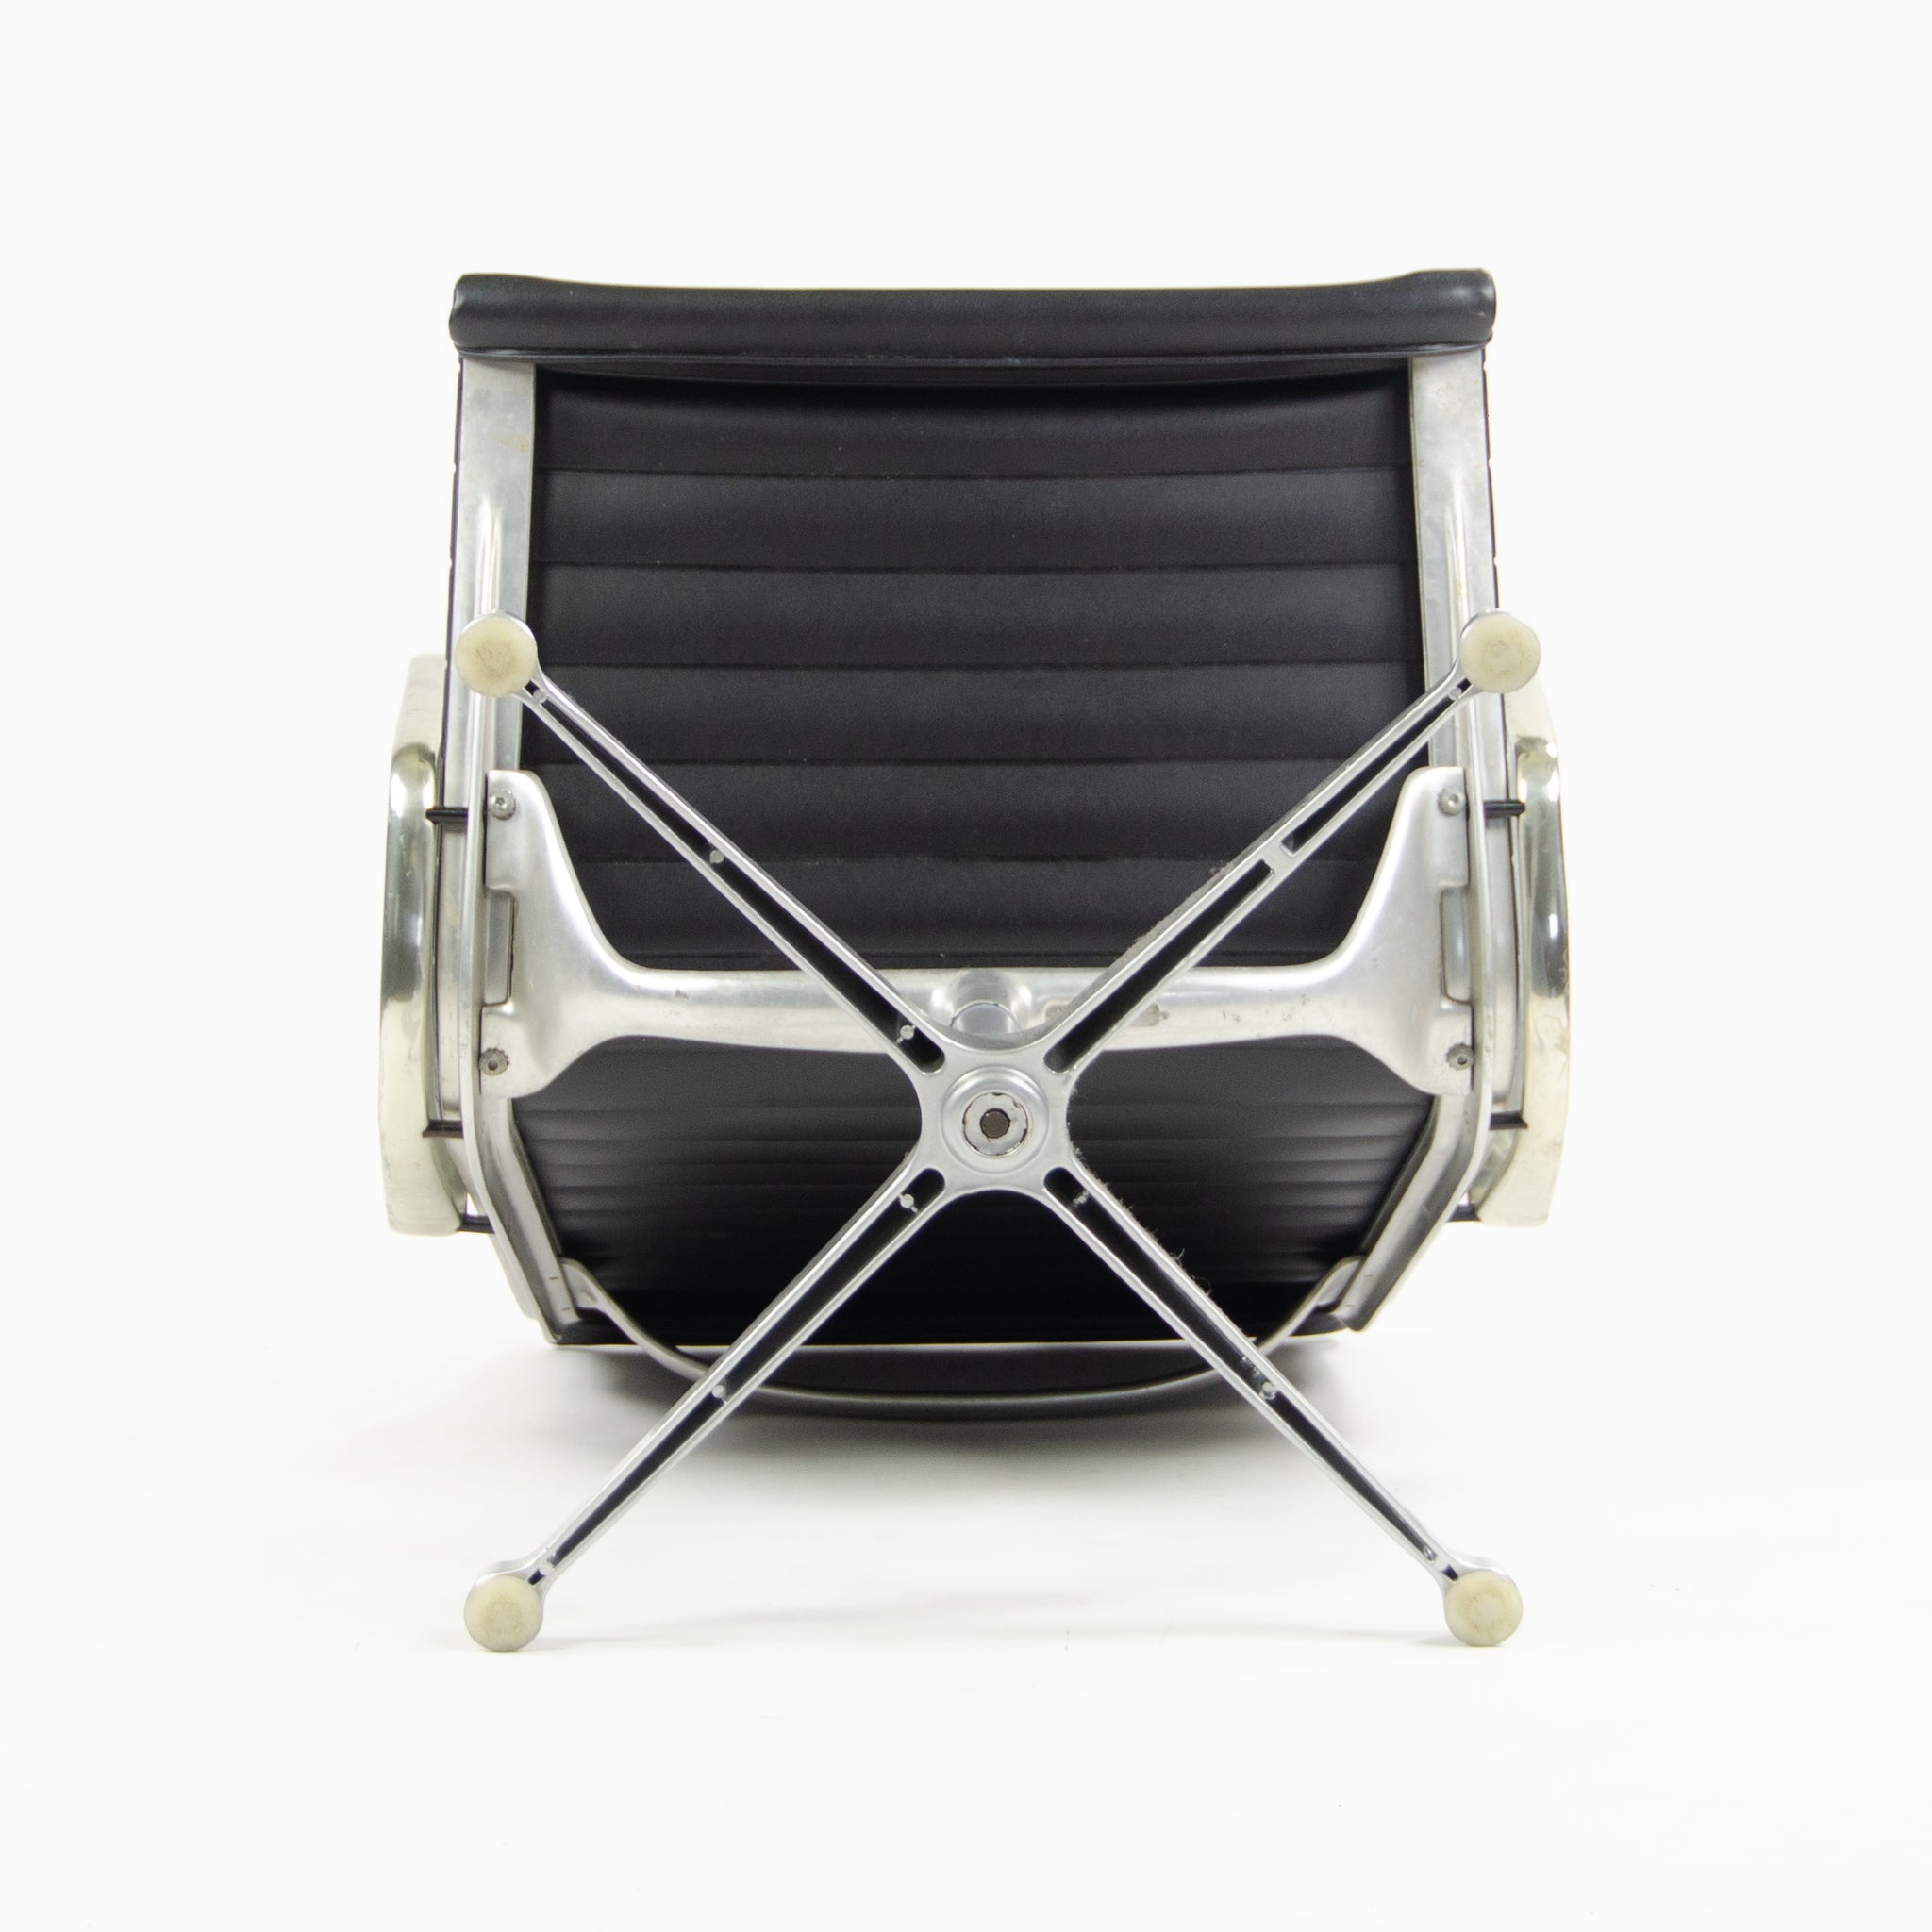 SOLD Early Pair Eames Herman Miller Aluminum Group Lounge Chairs, Charcoal Upholstery